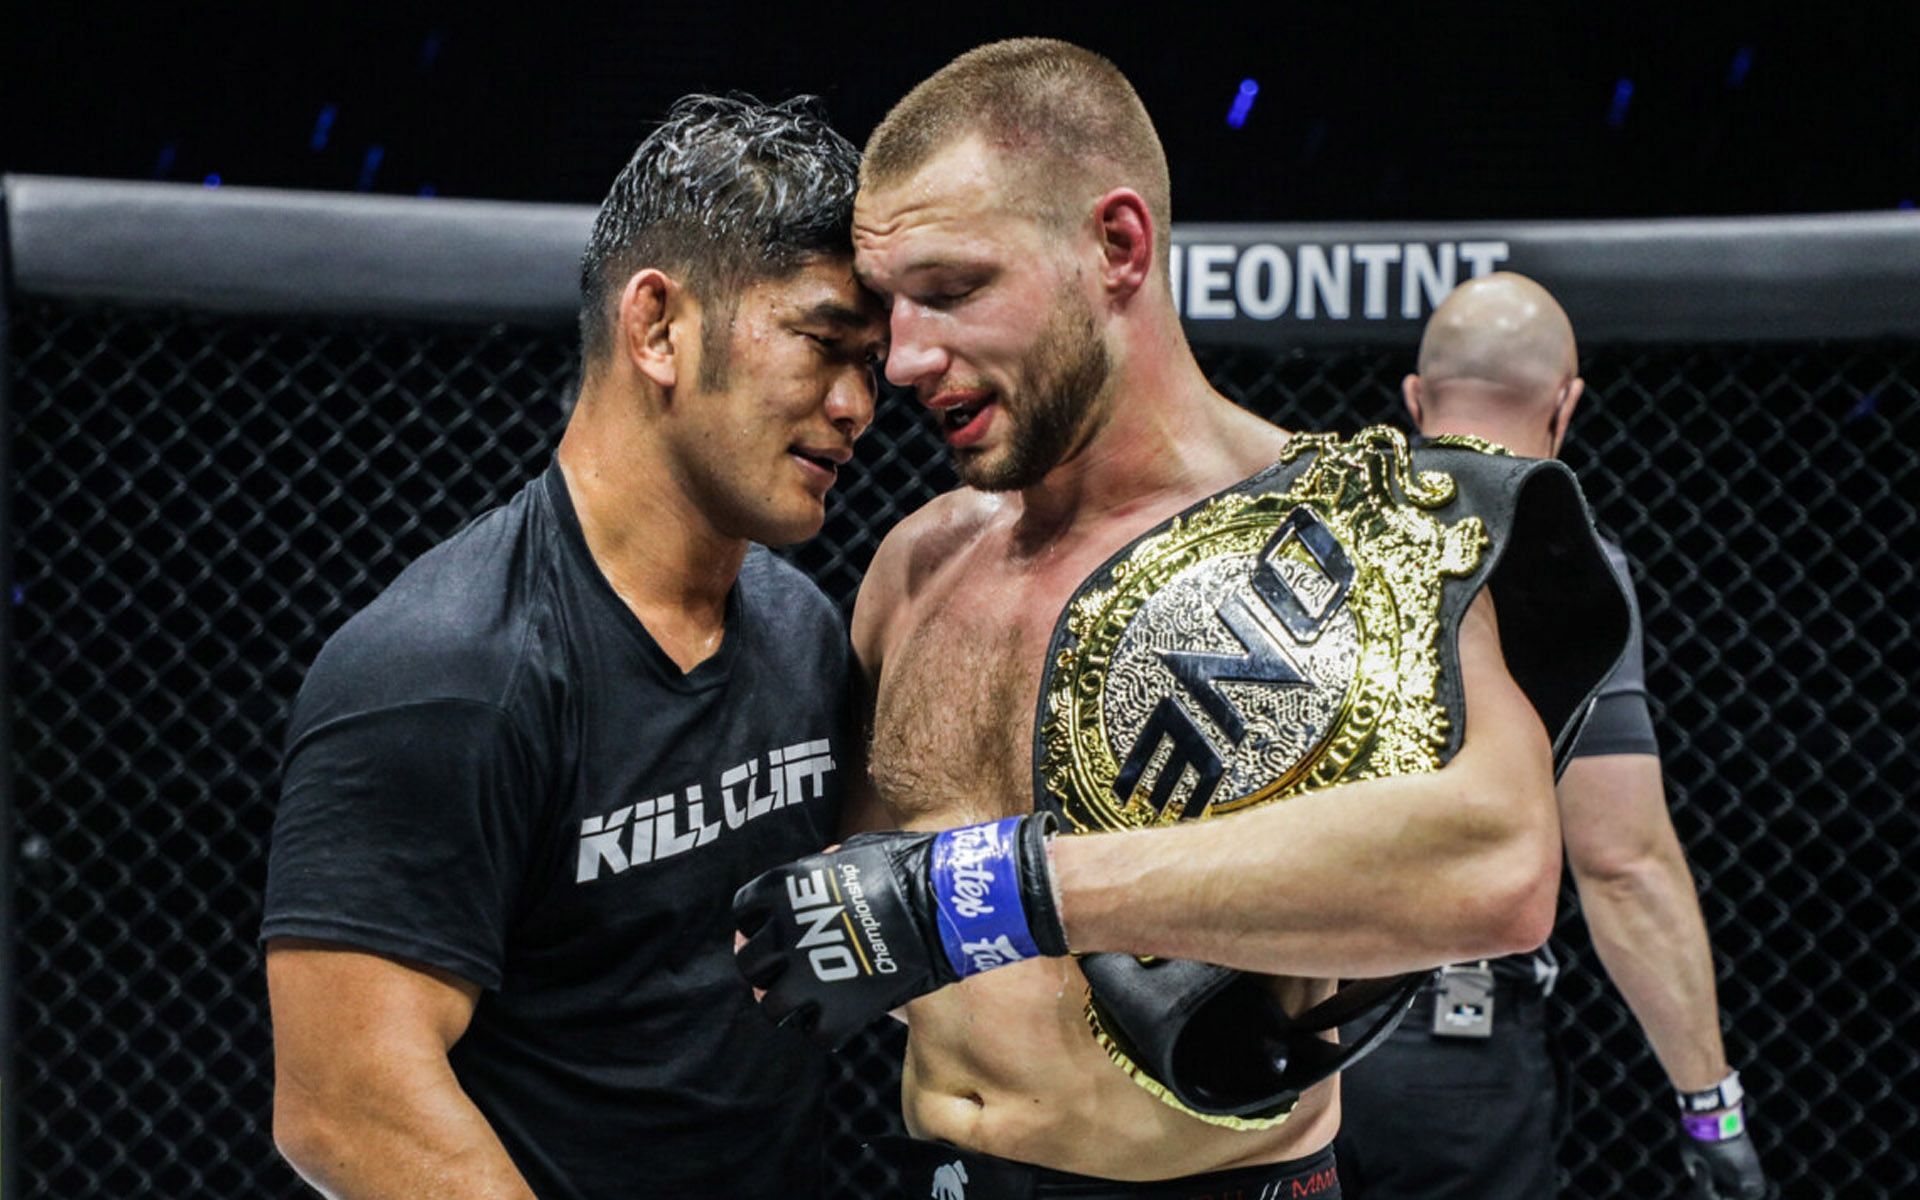 Aung La N Sang (L) and Reinier de Ridder (R) have mutual respect after two epic battles in the circle | [Photo: ONE Championship]